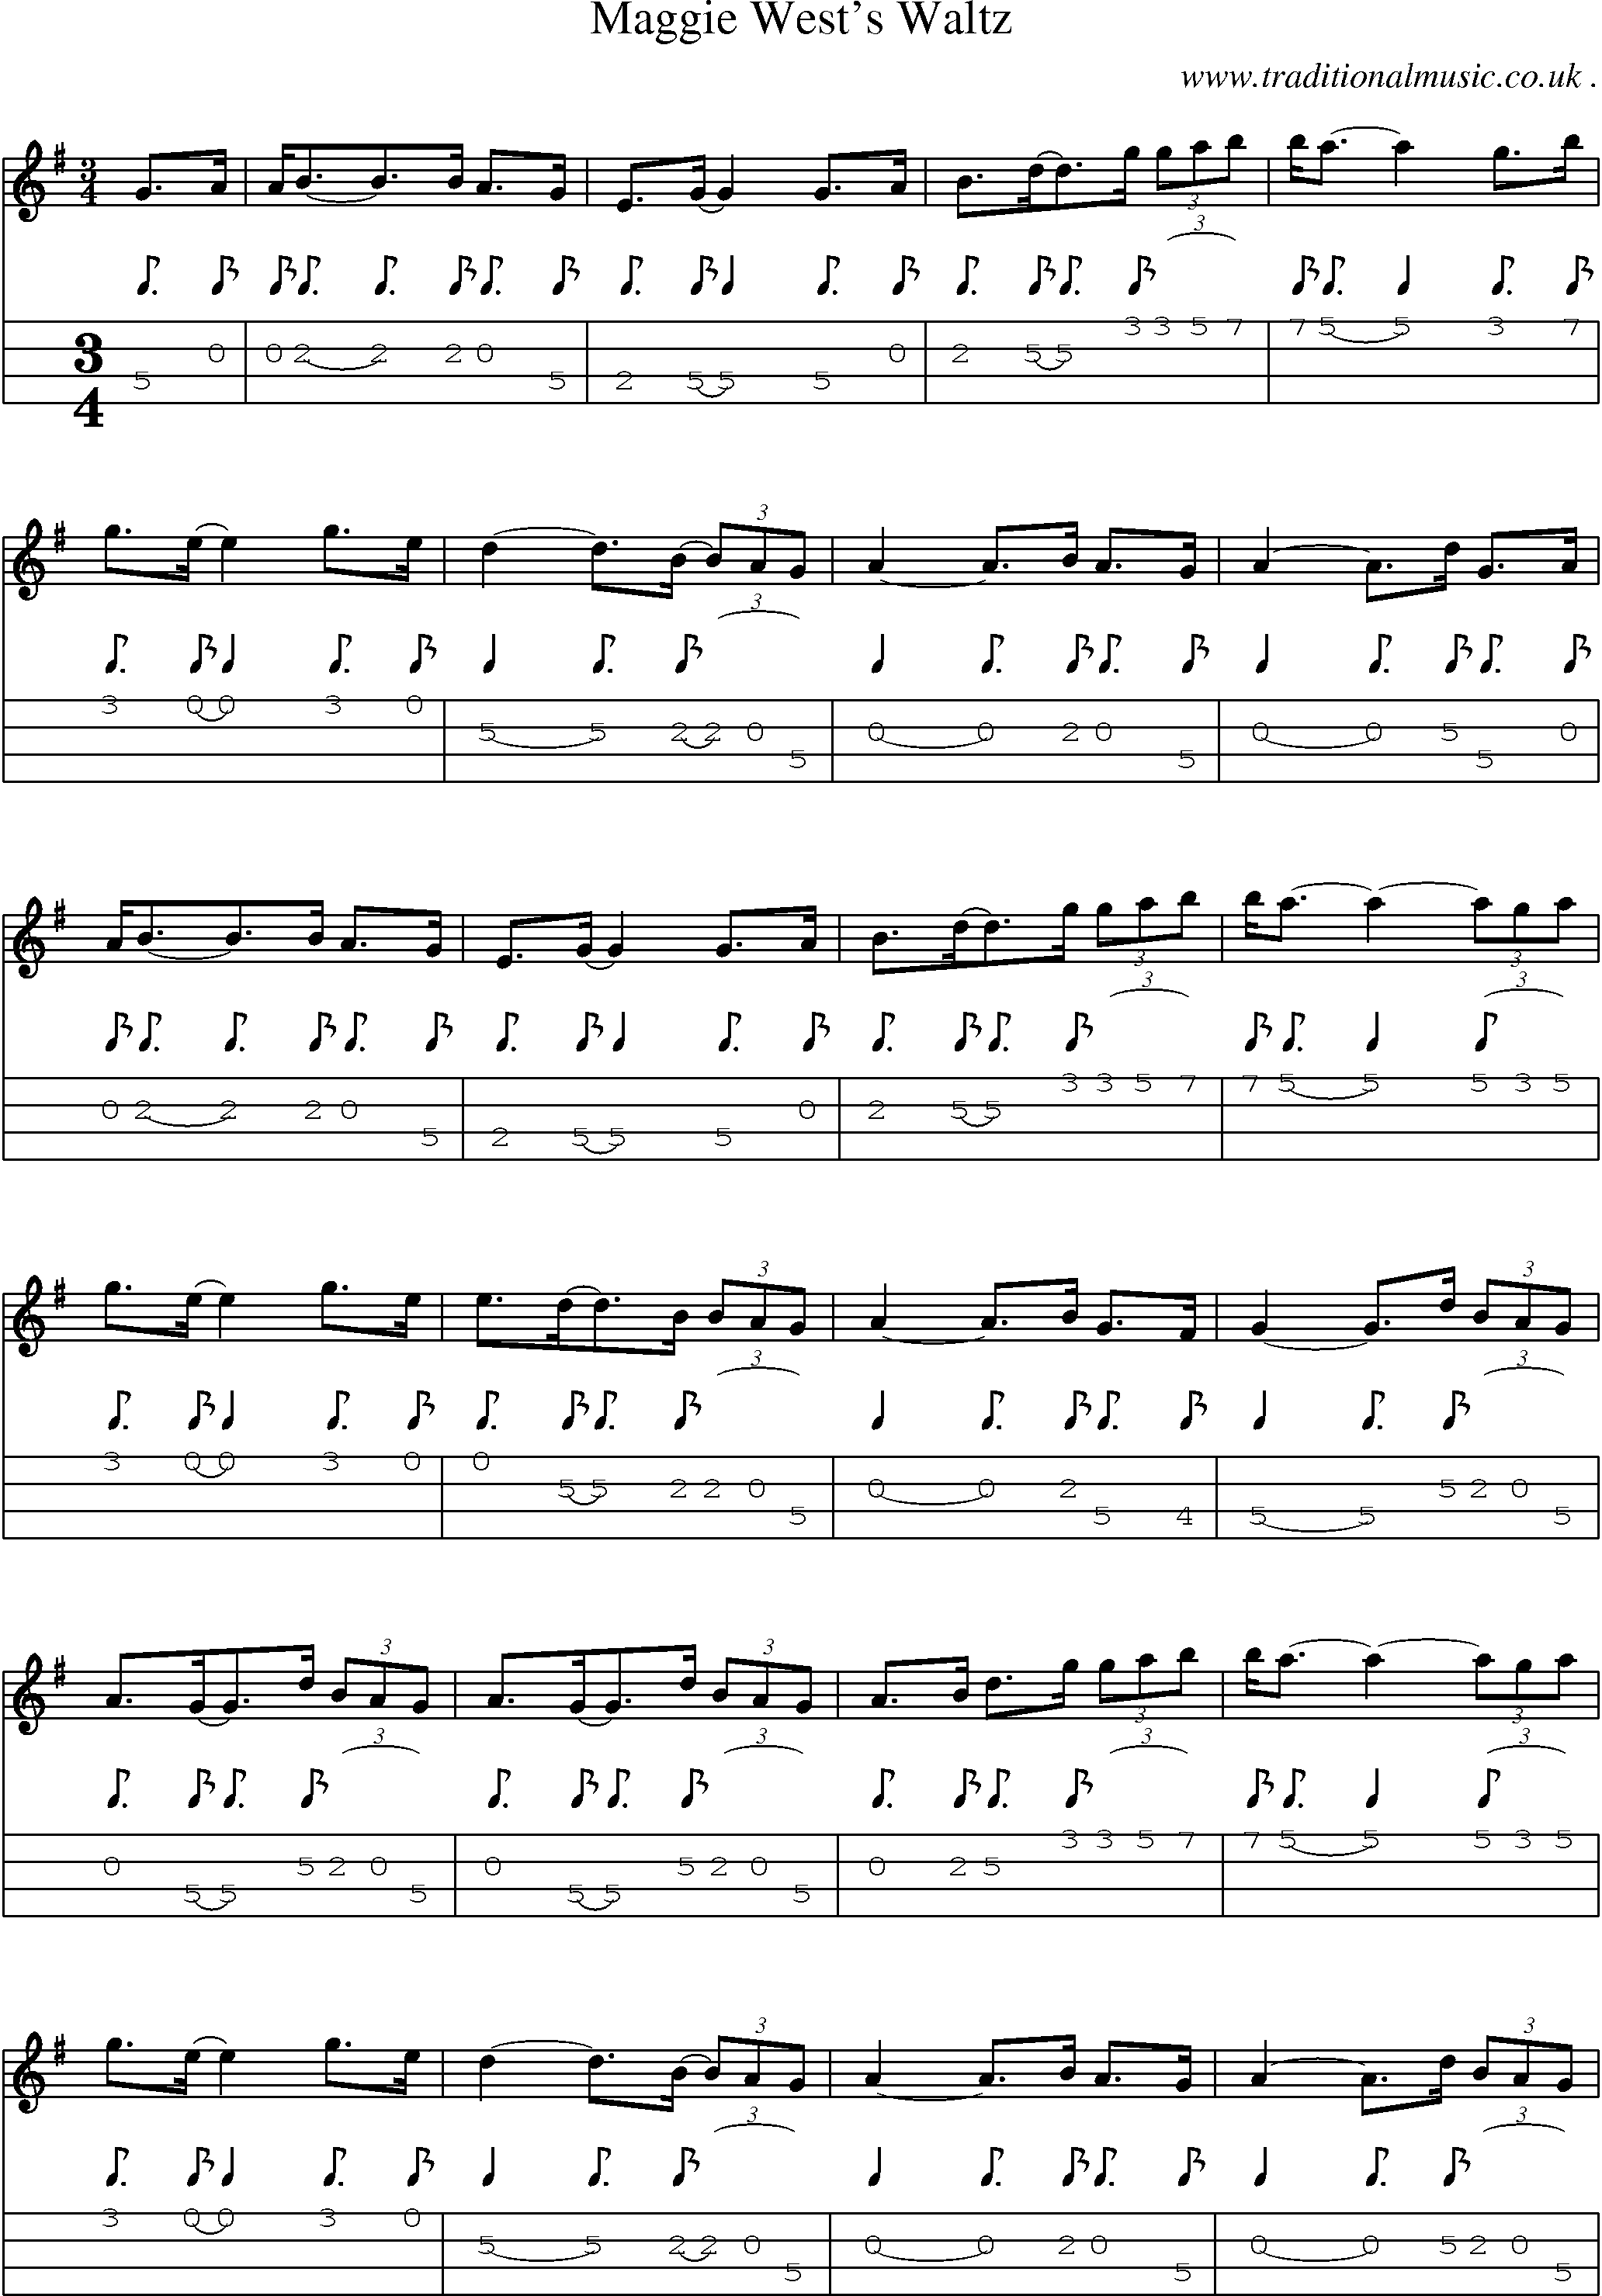 Sheet-music  score, Chords and Mandolin Tabs for Maggie Wests Waltz